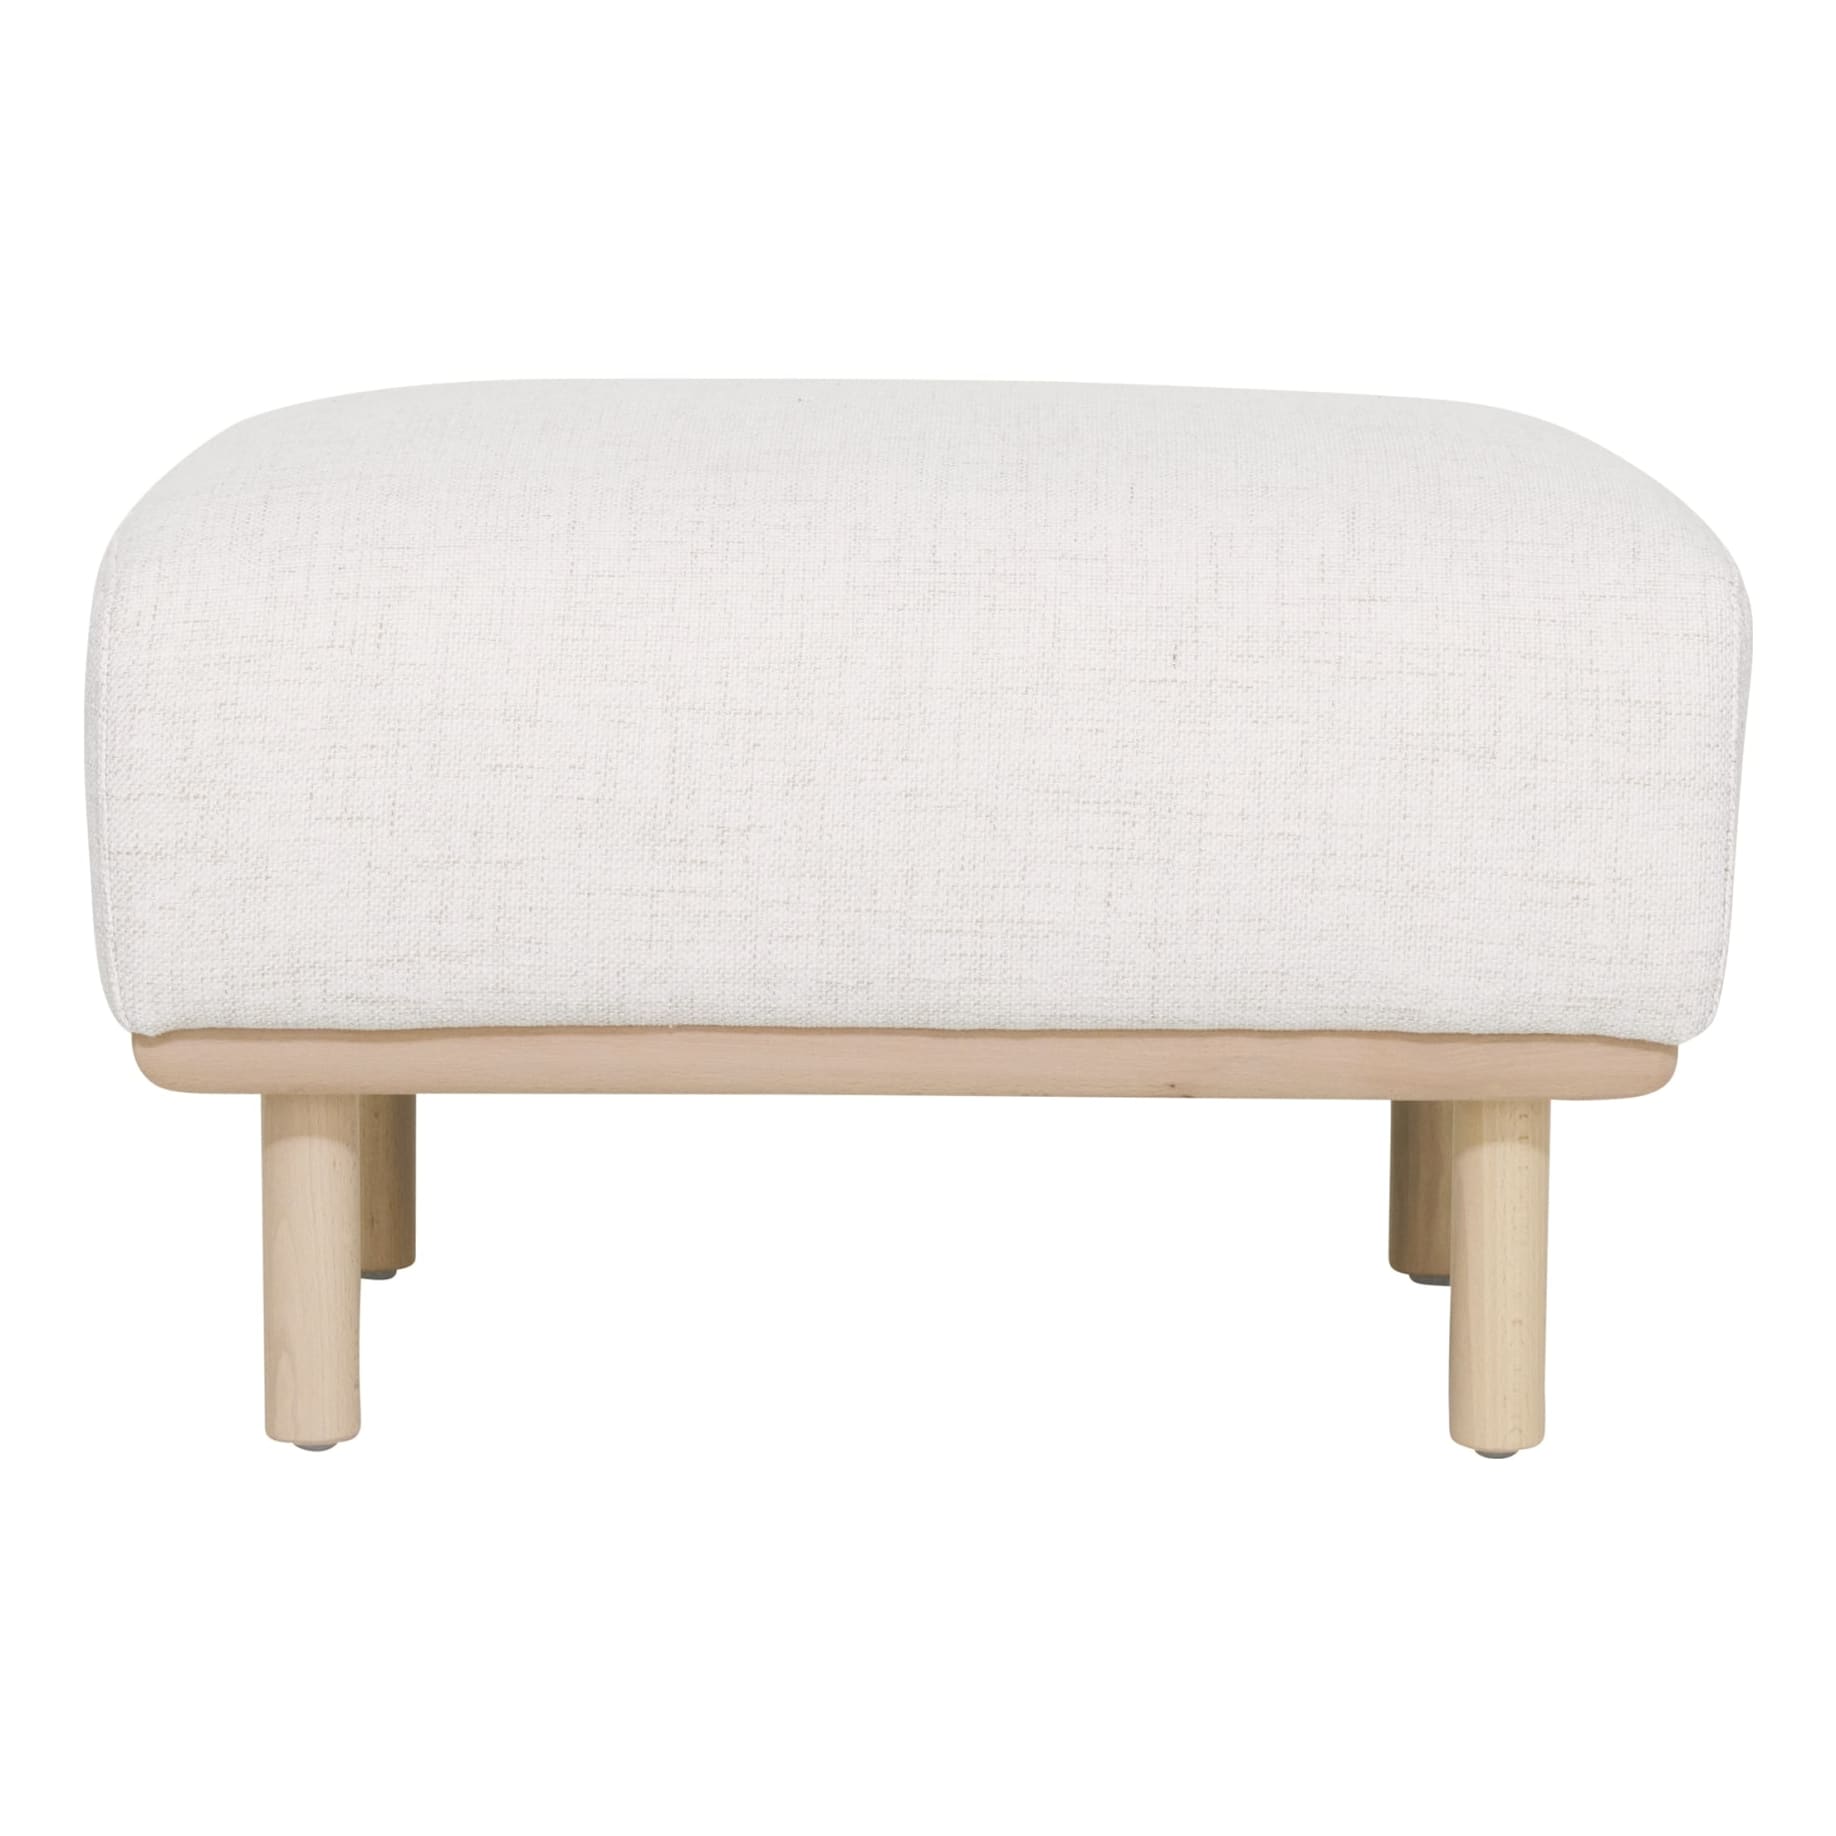 Stratton Footstool in Cloud White Sand